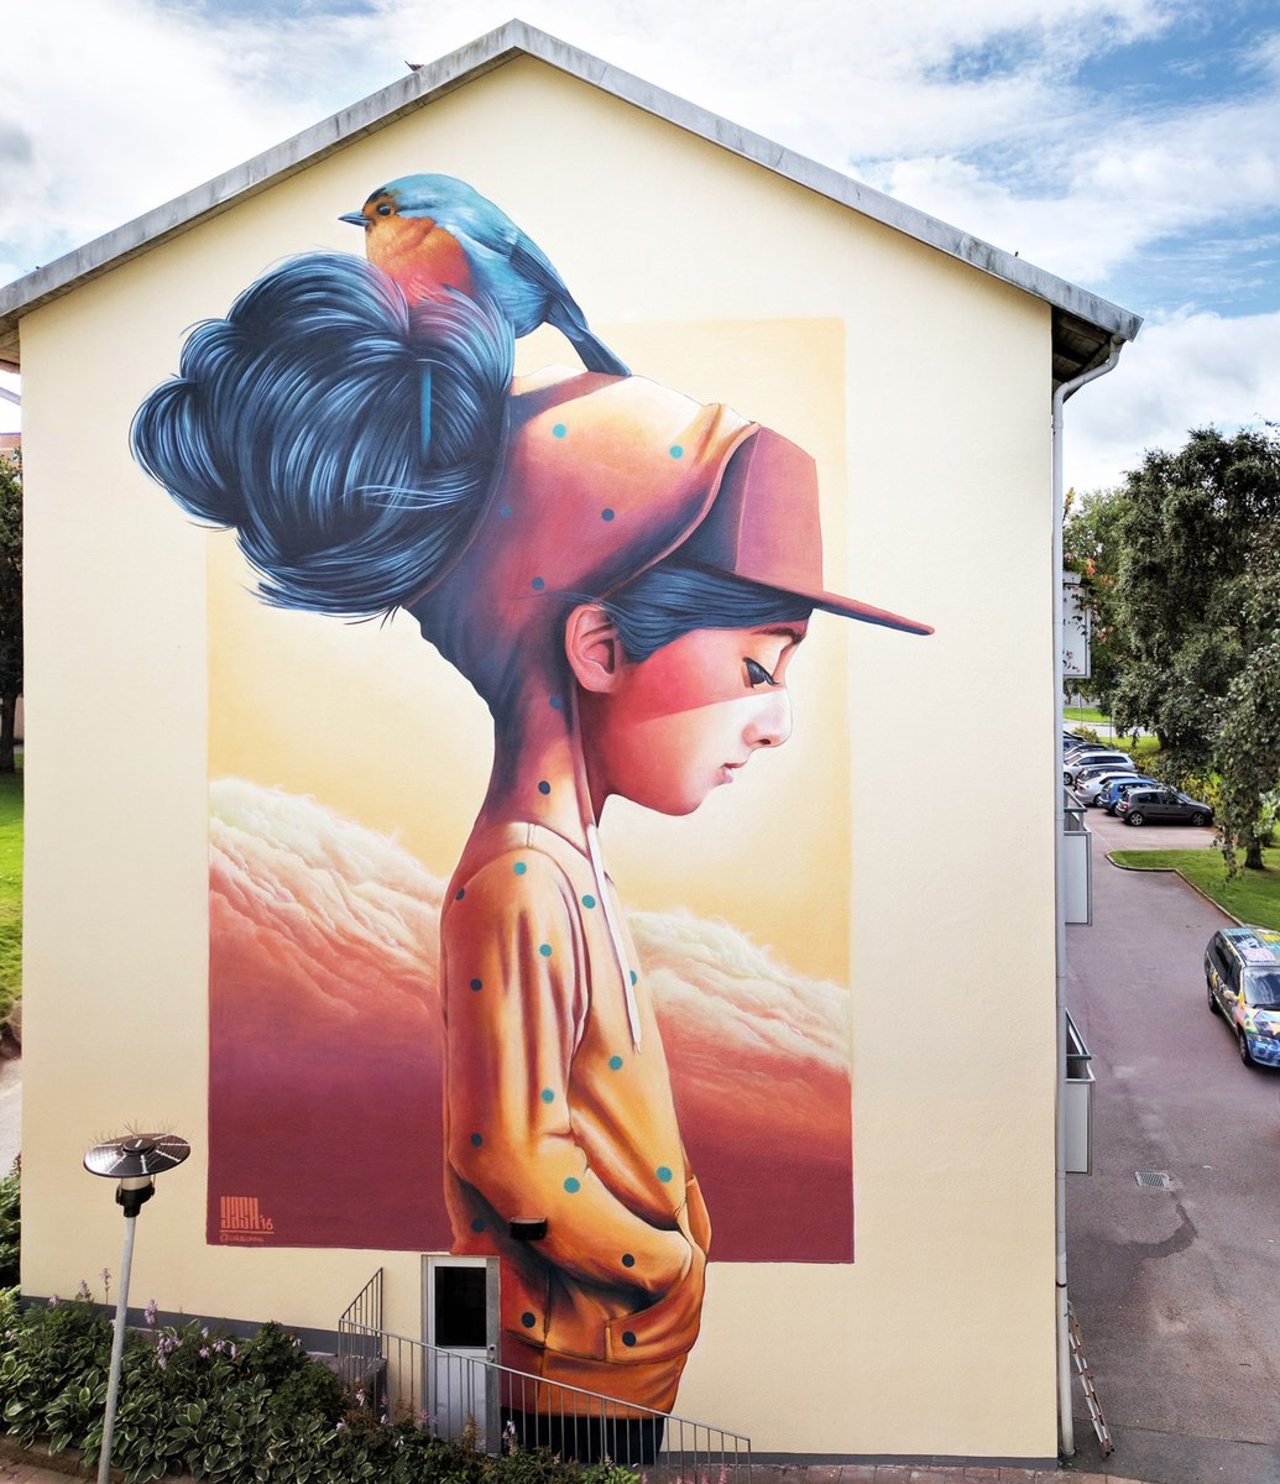 Street artist brightens up walls in Swedish suburbs with these incredible murals http://www.thelocal.se/20160808/this-swedish-artists-amazing-murals-will-make-your-jaw-drop #streetart https://t.co/FkCbeK4W51